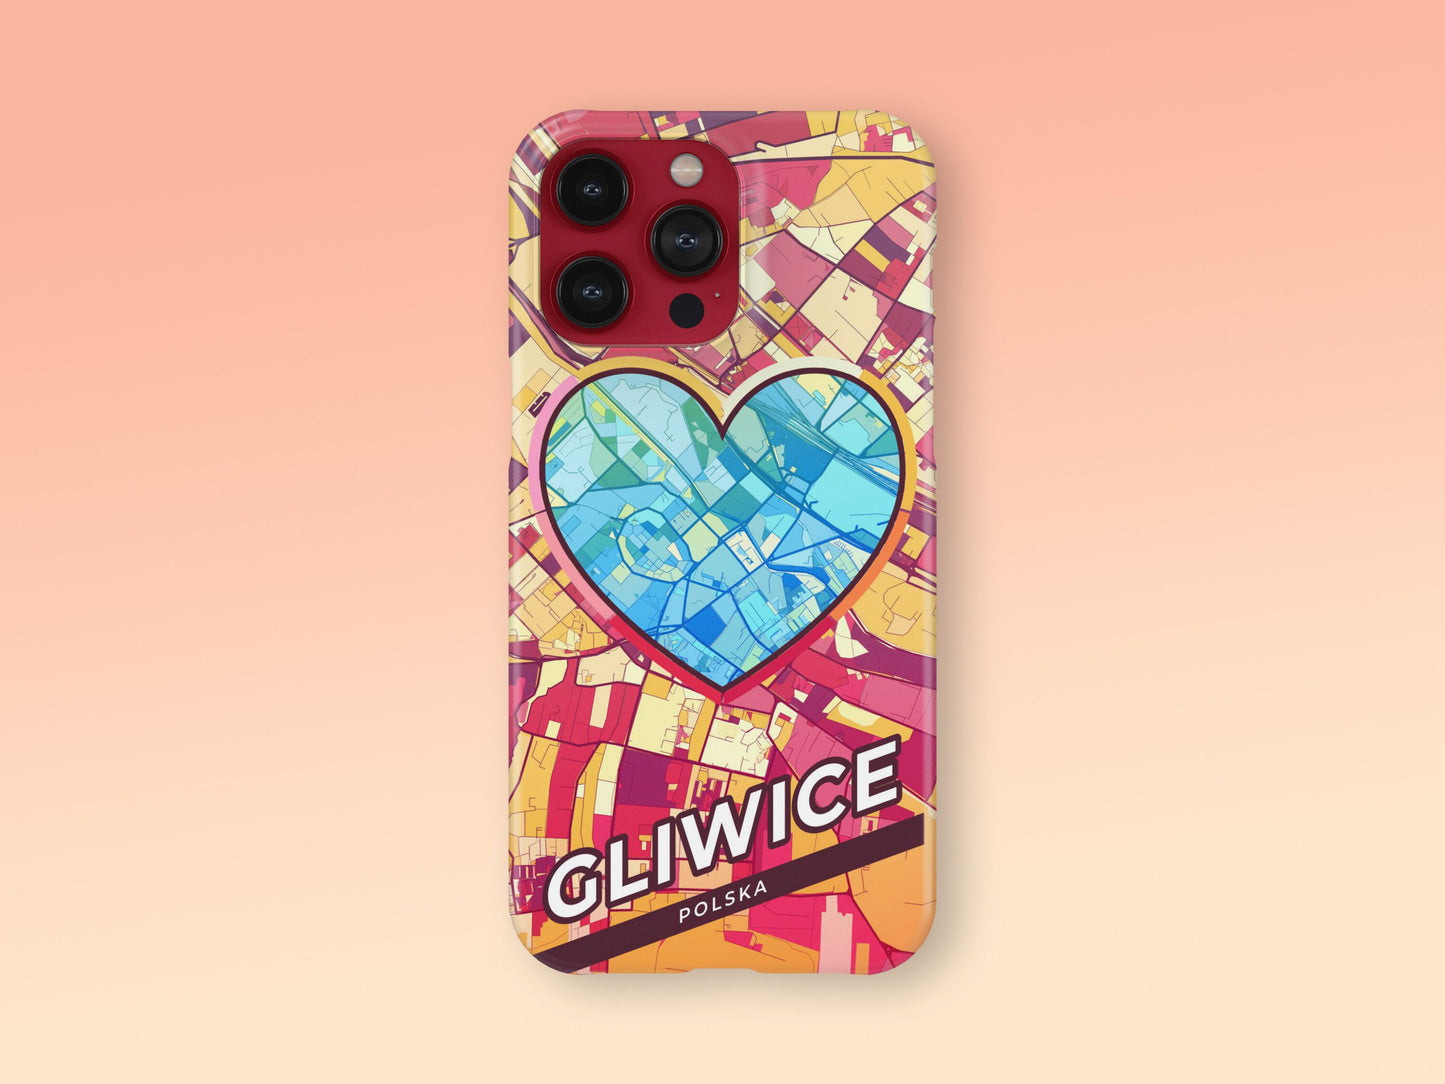 Gliwice Poland slim phone case with colorful icon. Birthday, wedding or housewarming gift. Couple match cases. 2